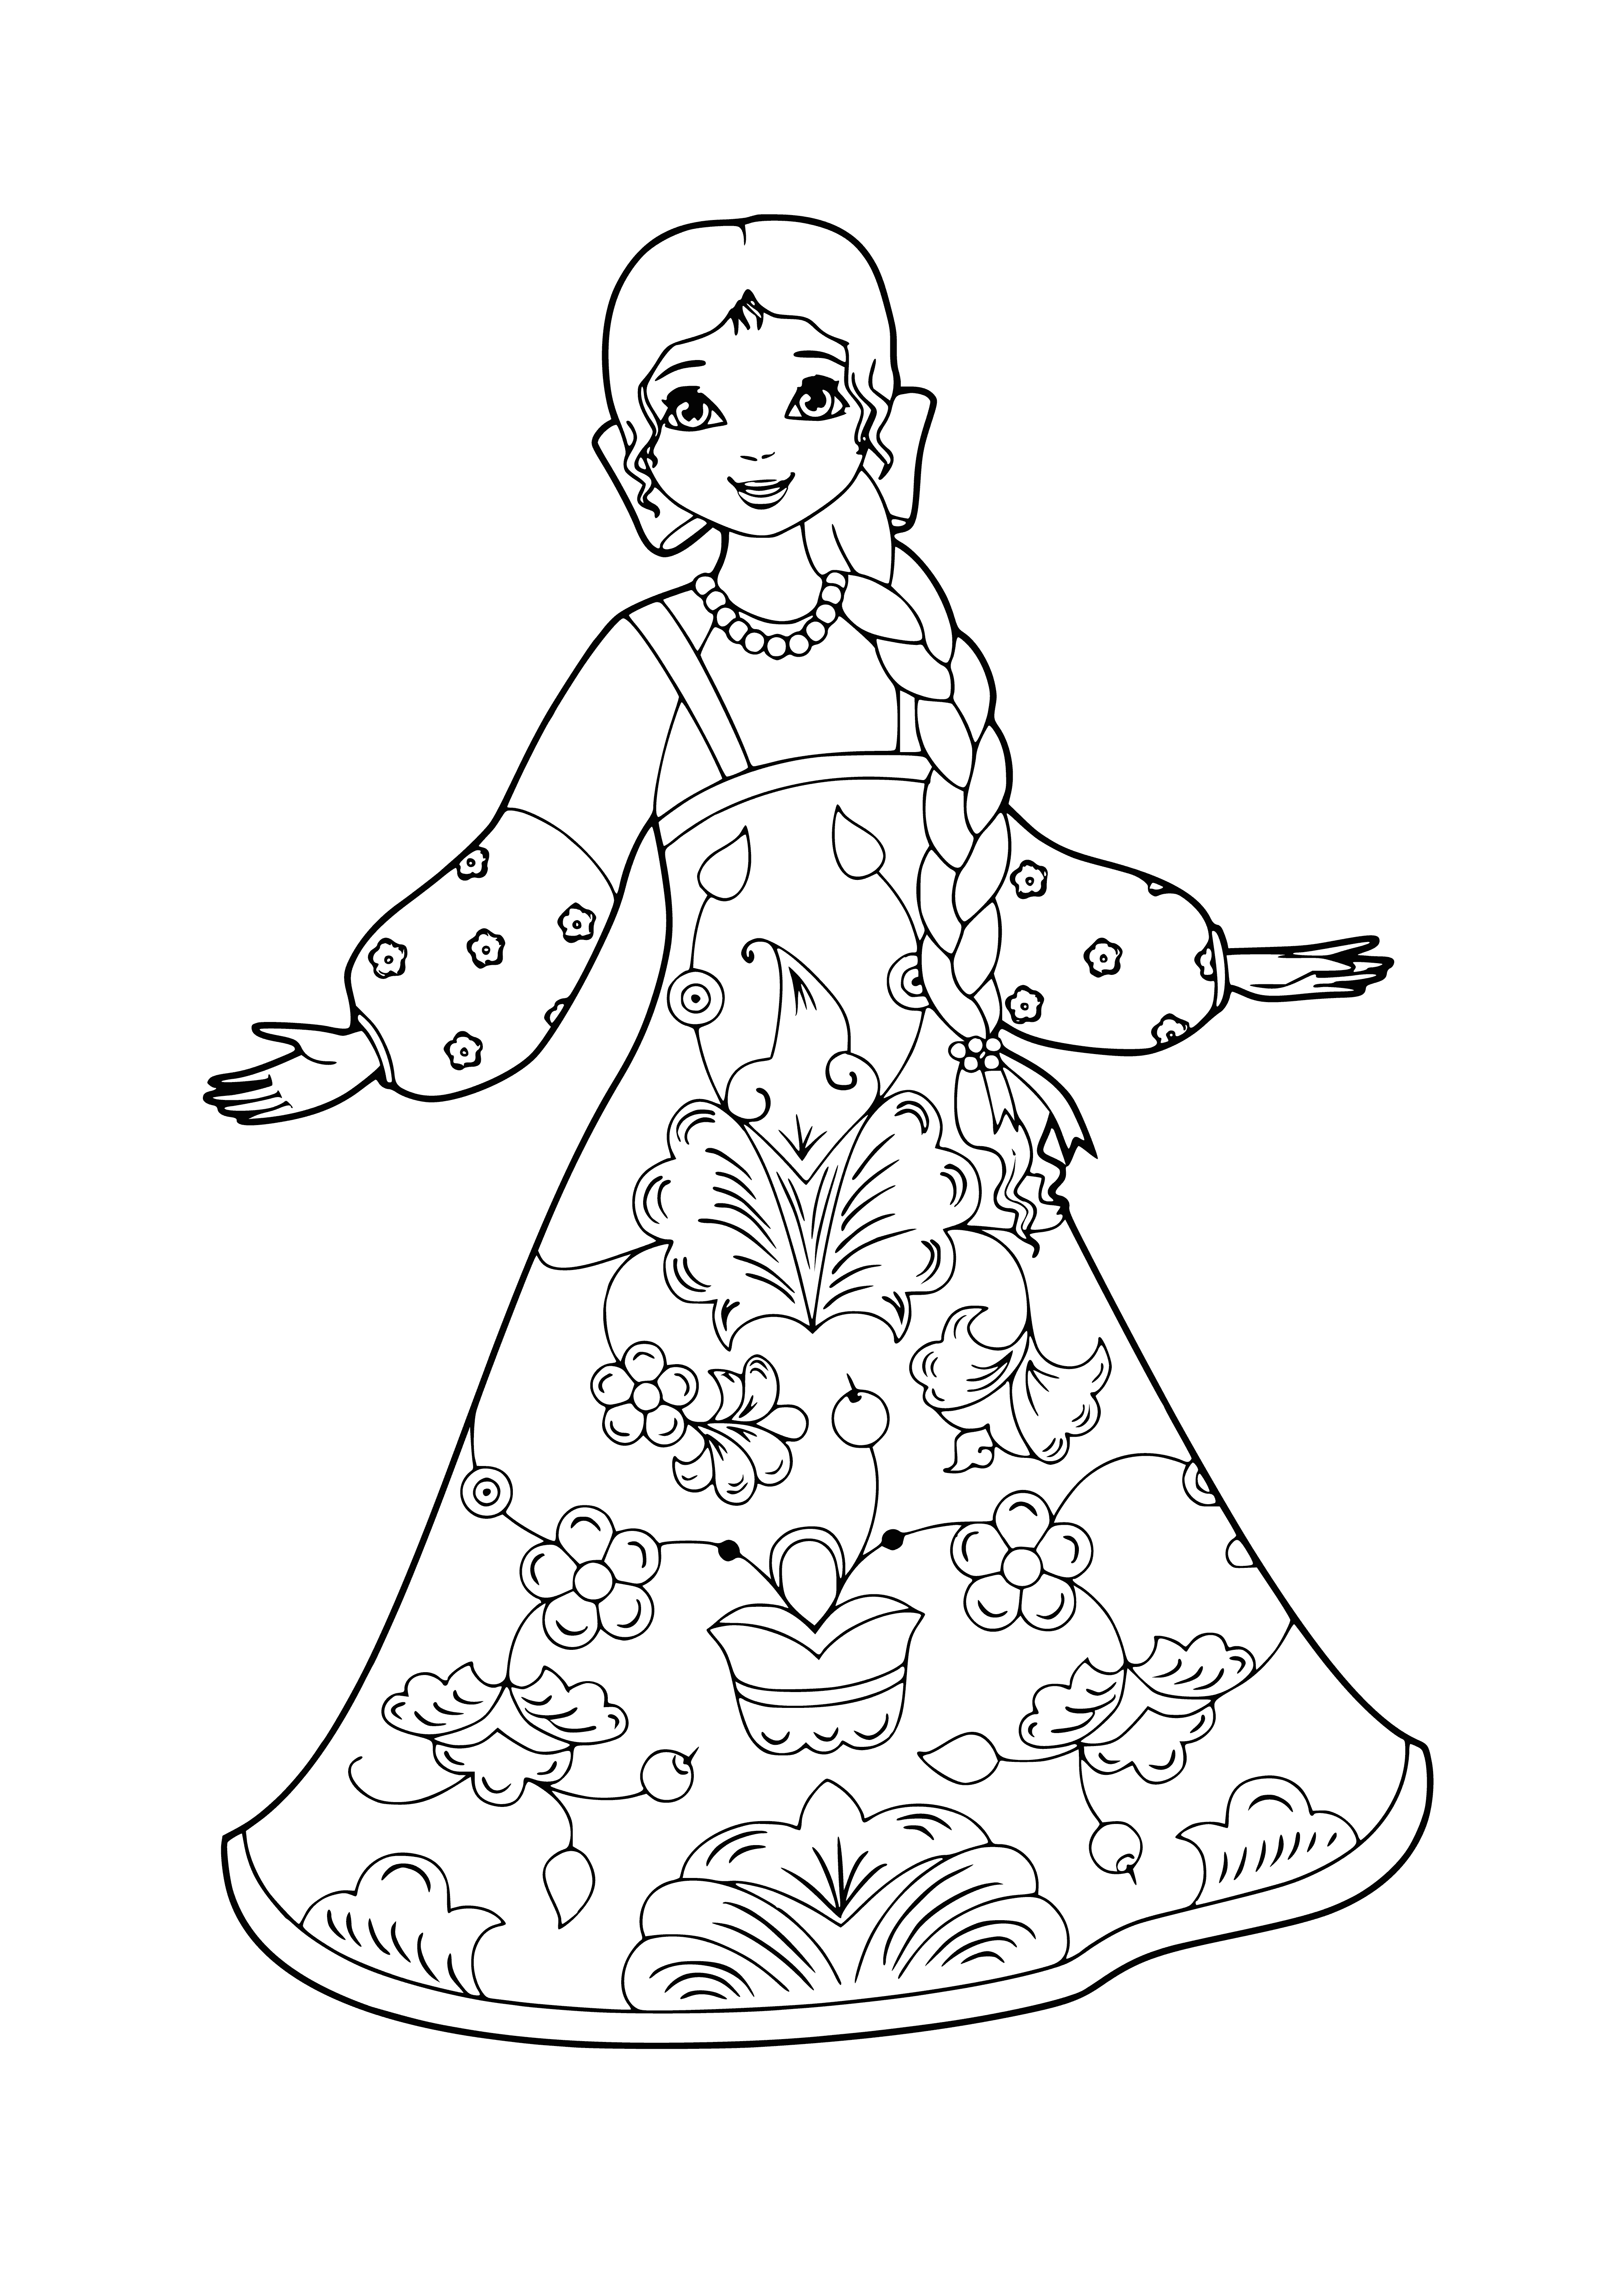 coloring page: The women in the coloring page look fashionable & ready to go out & have a good time.